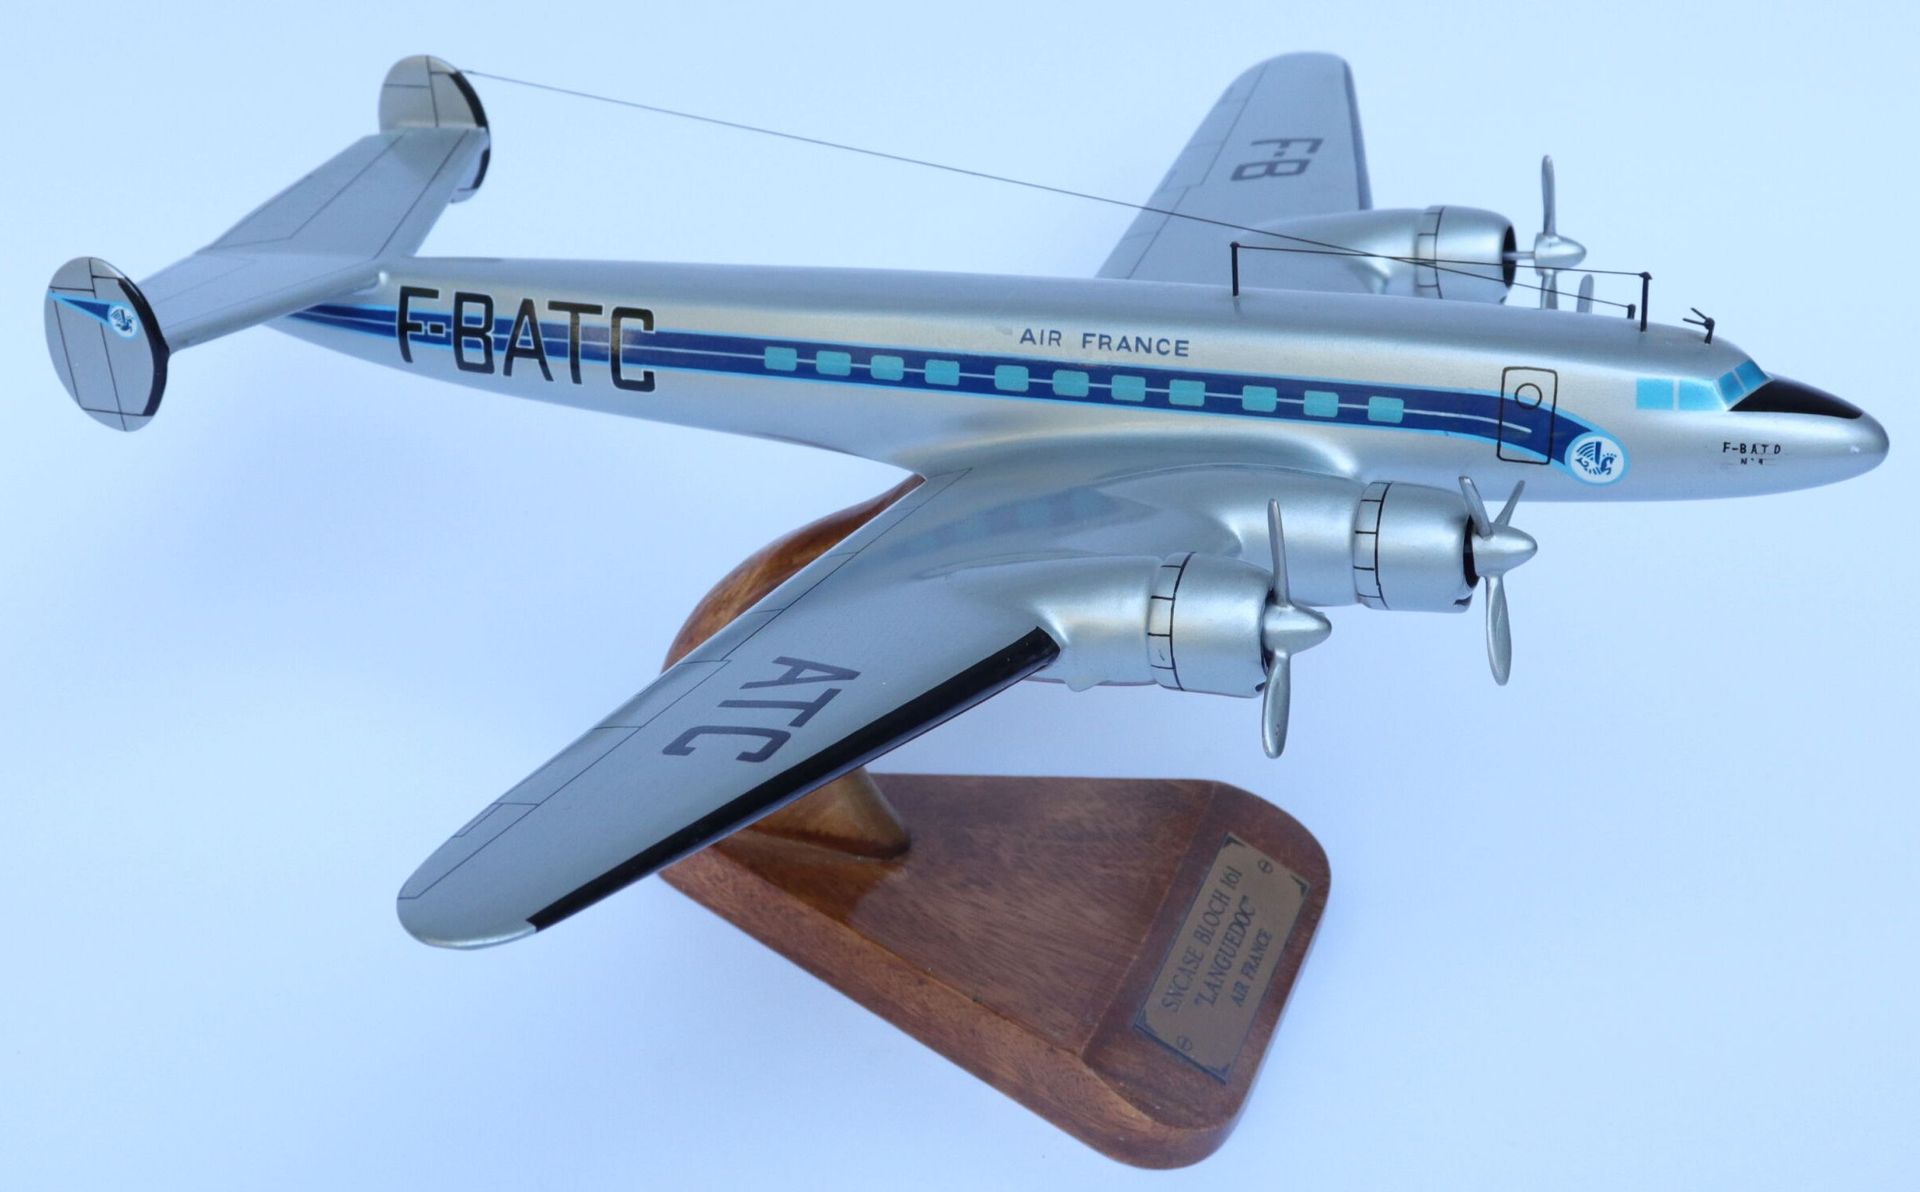 Null SNCASE BLOCH 161 LANGUEDOC AIR FRANCE.

Painted wooden model with registrat&hellip;